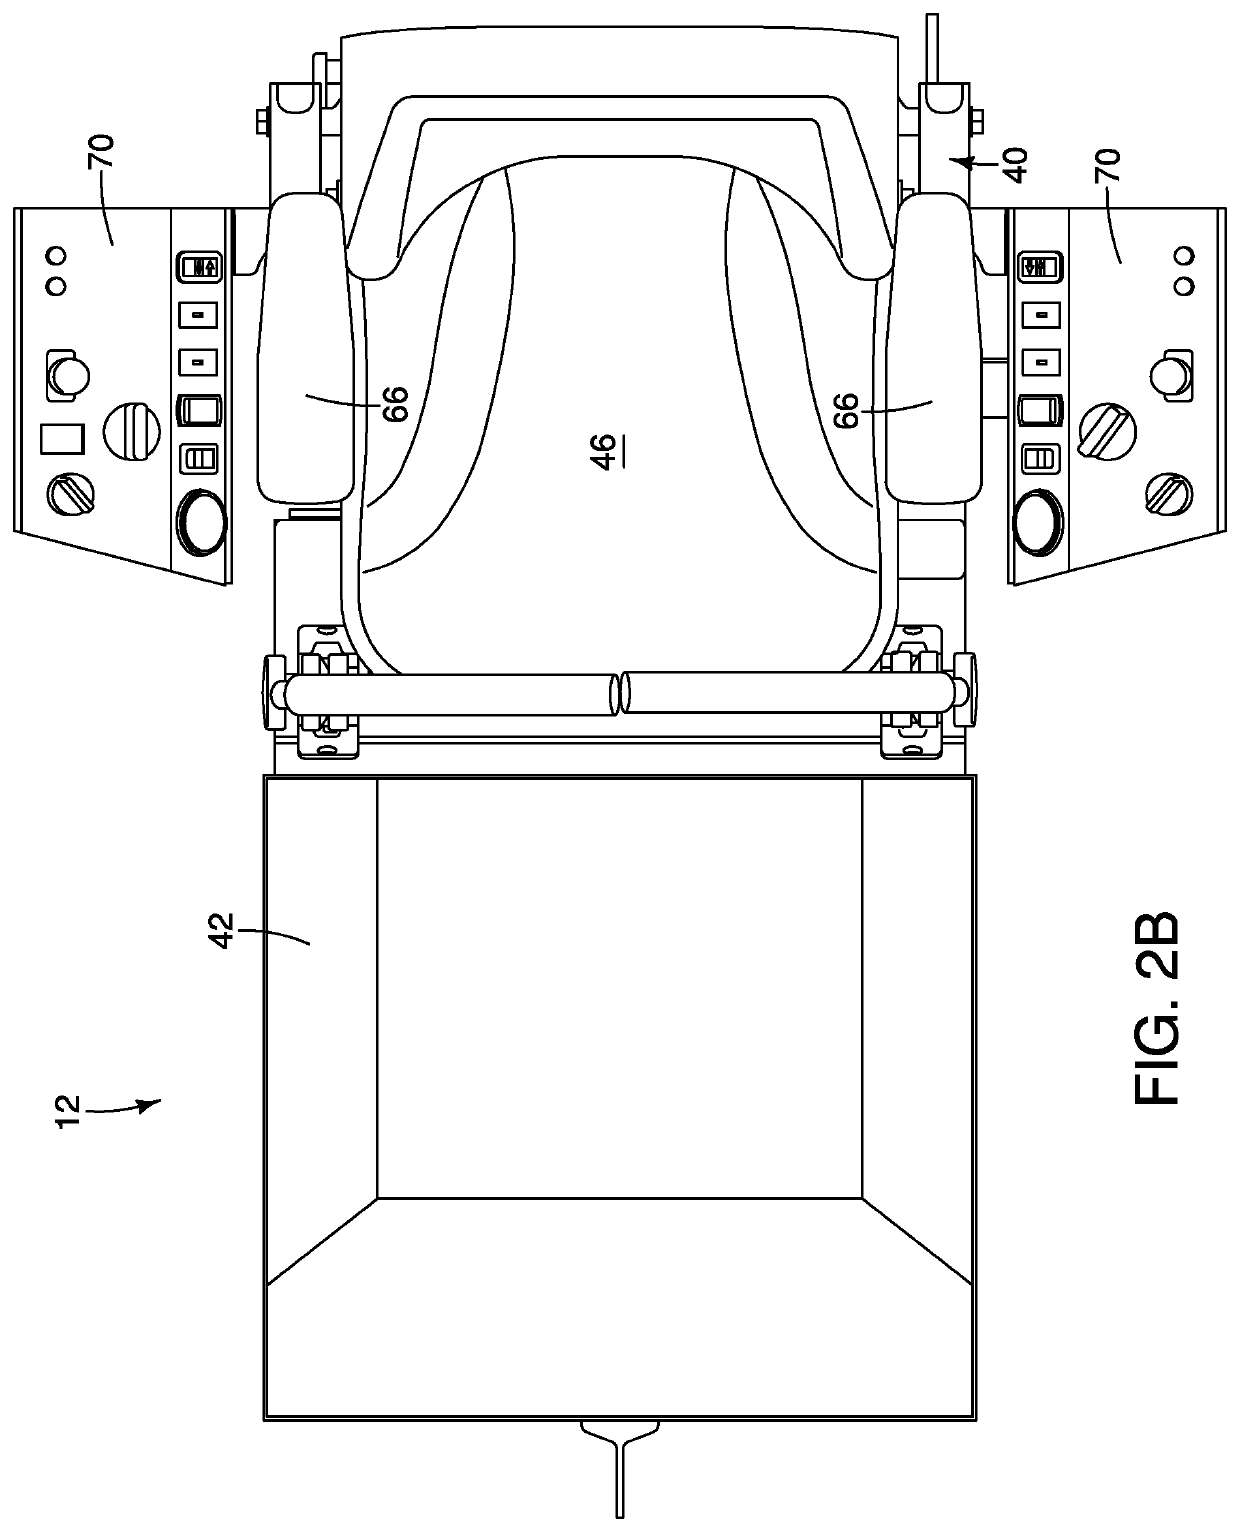 Adjustable seat assembly for a lawn maintenance vehicle